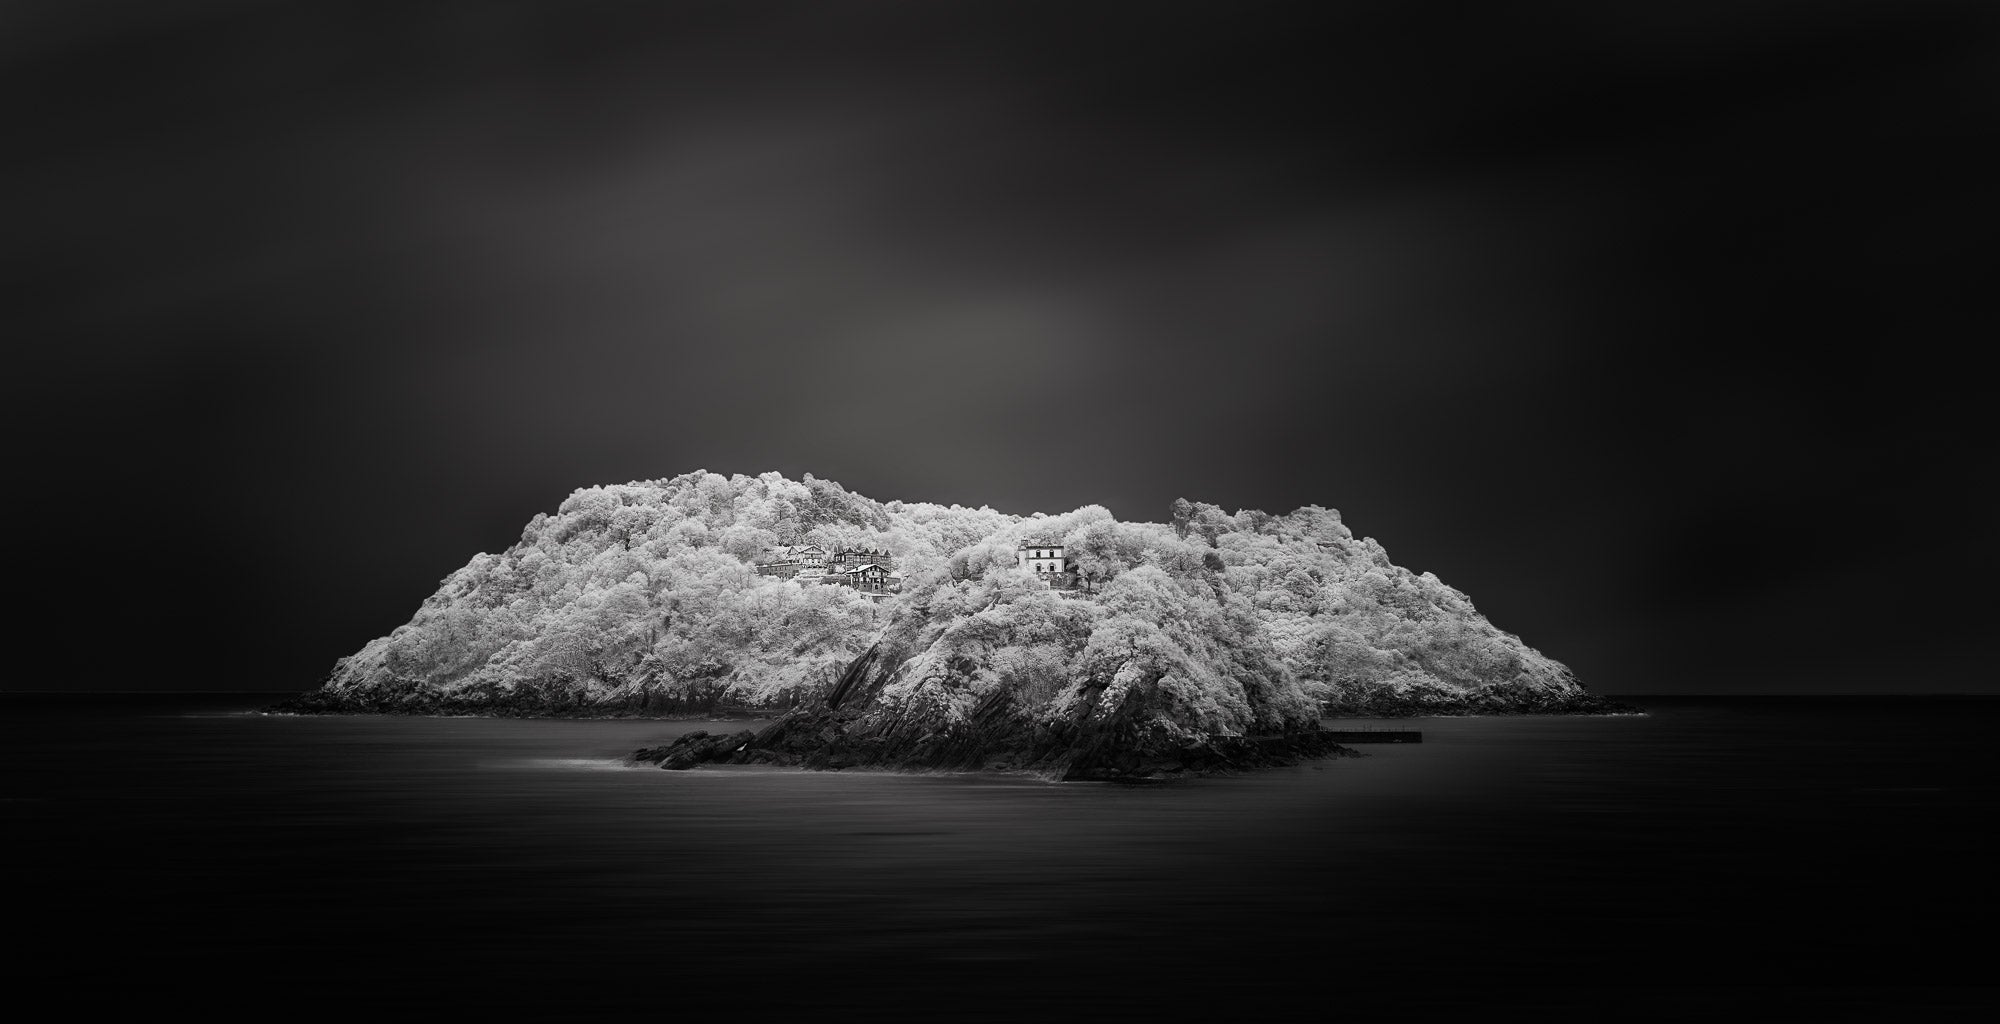 "Black and white image of an isolated island in San Sebastian, Spain, with radiant white foliage under a dark sky."